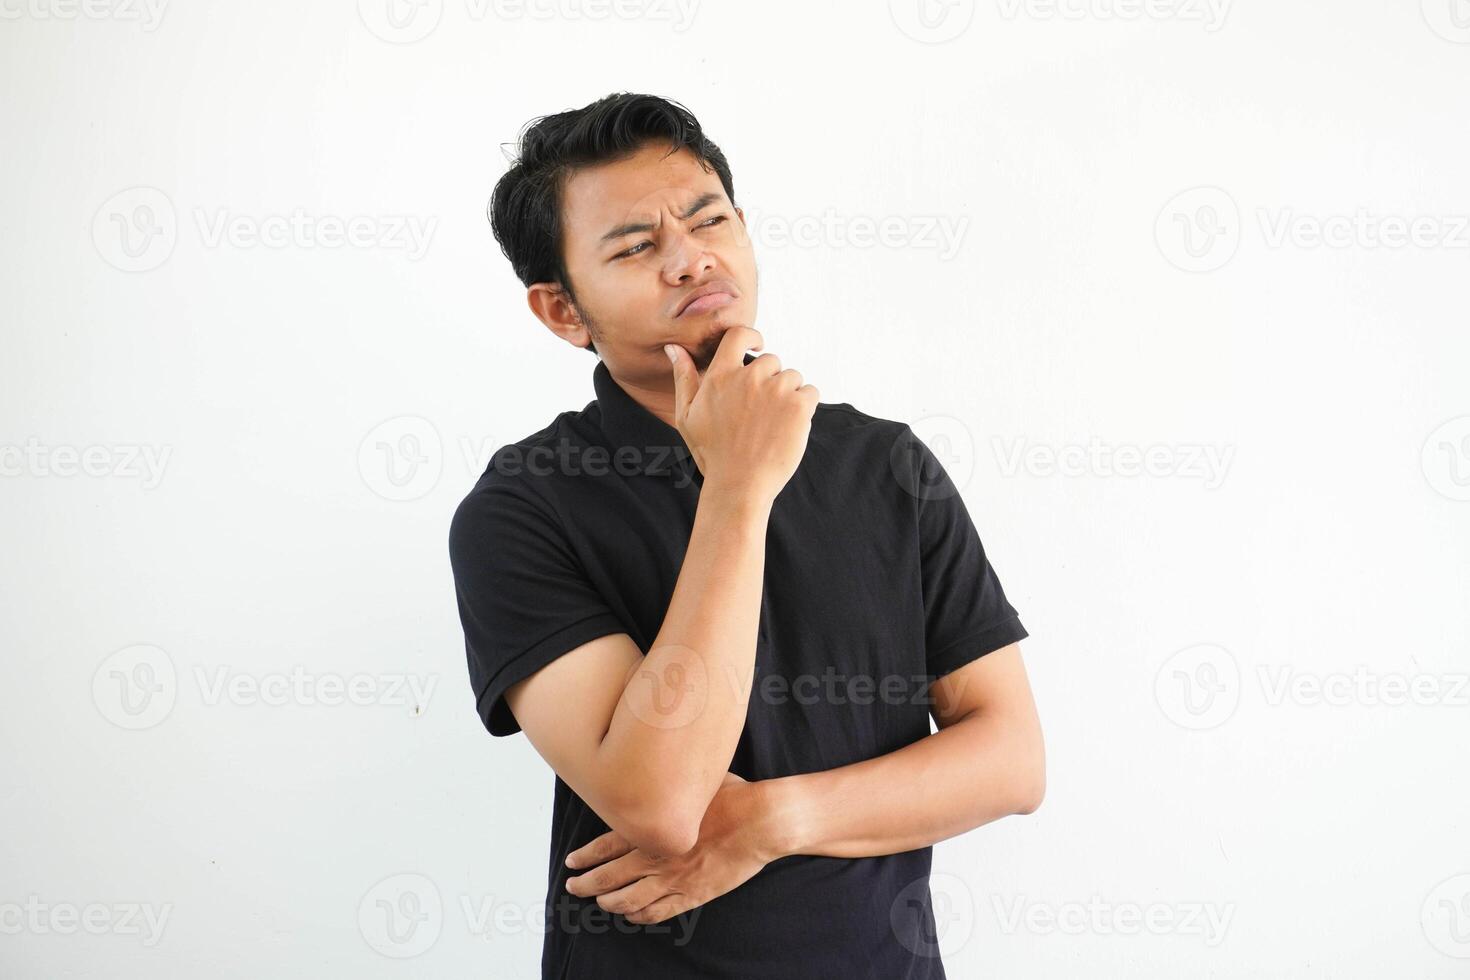 thinking something idea young asian man and hand holding chin casual outfit black polo t shirt isolated on white background photo